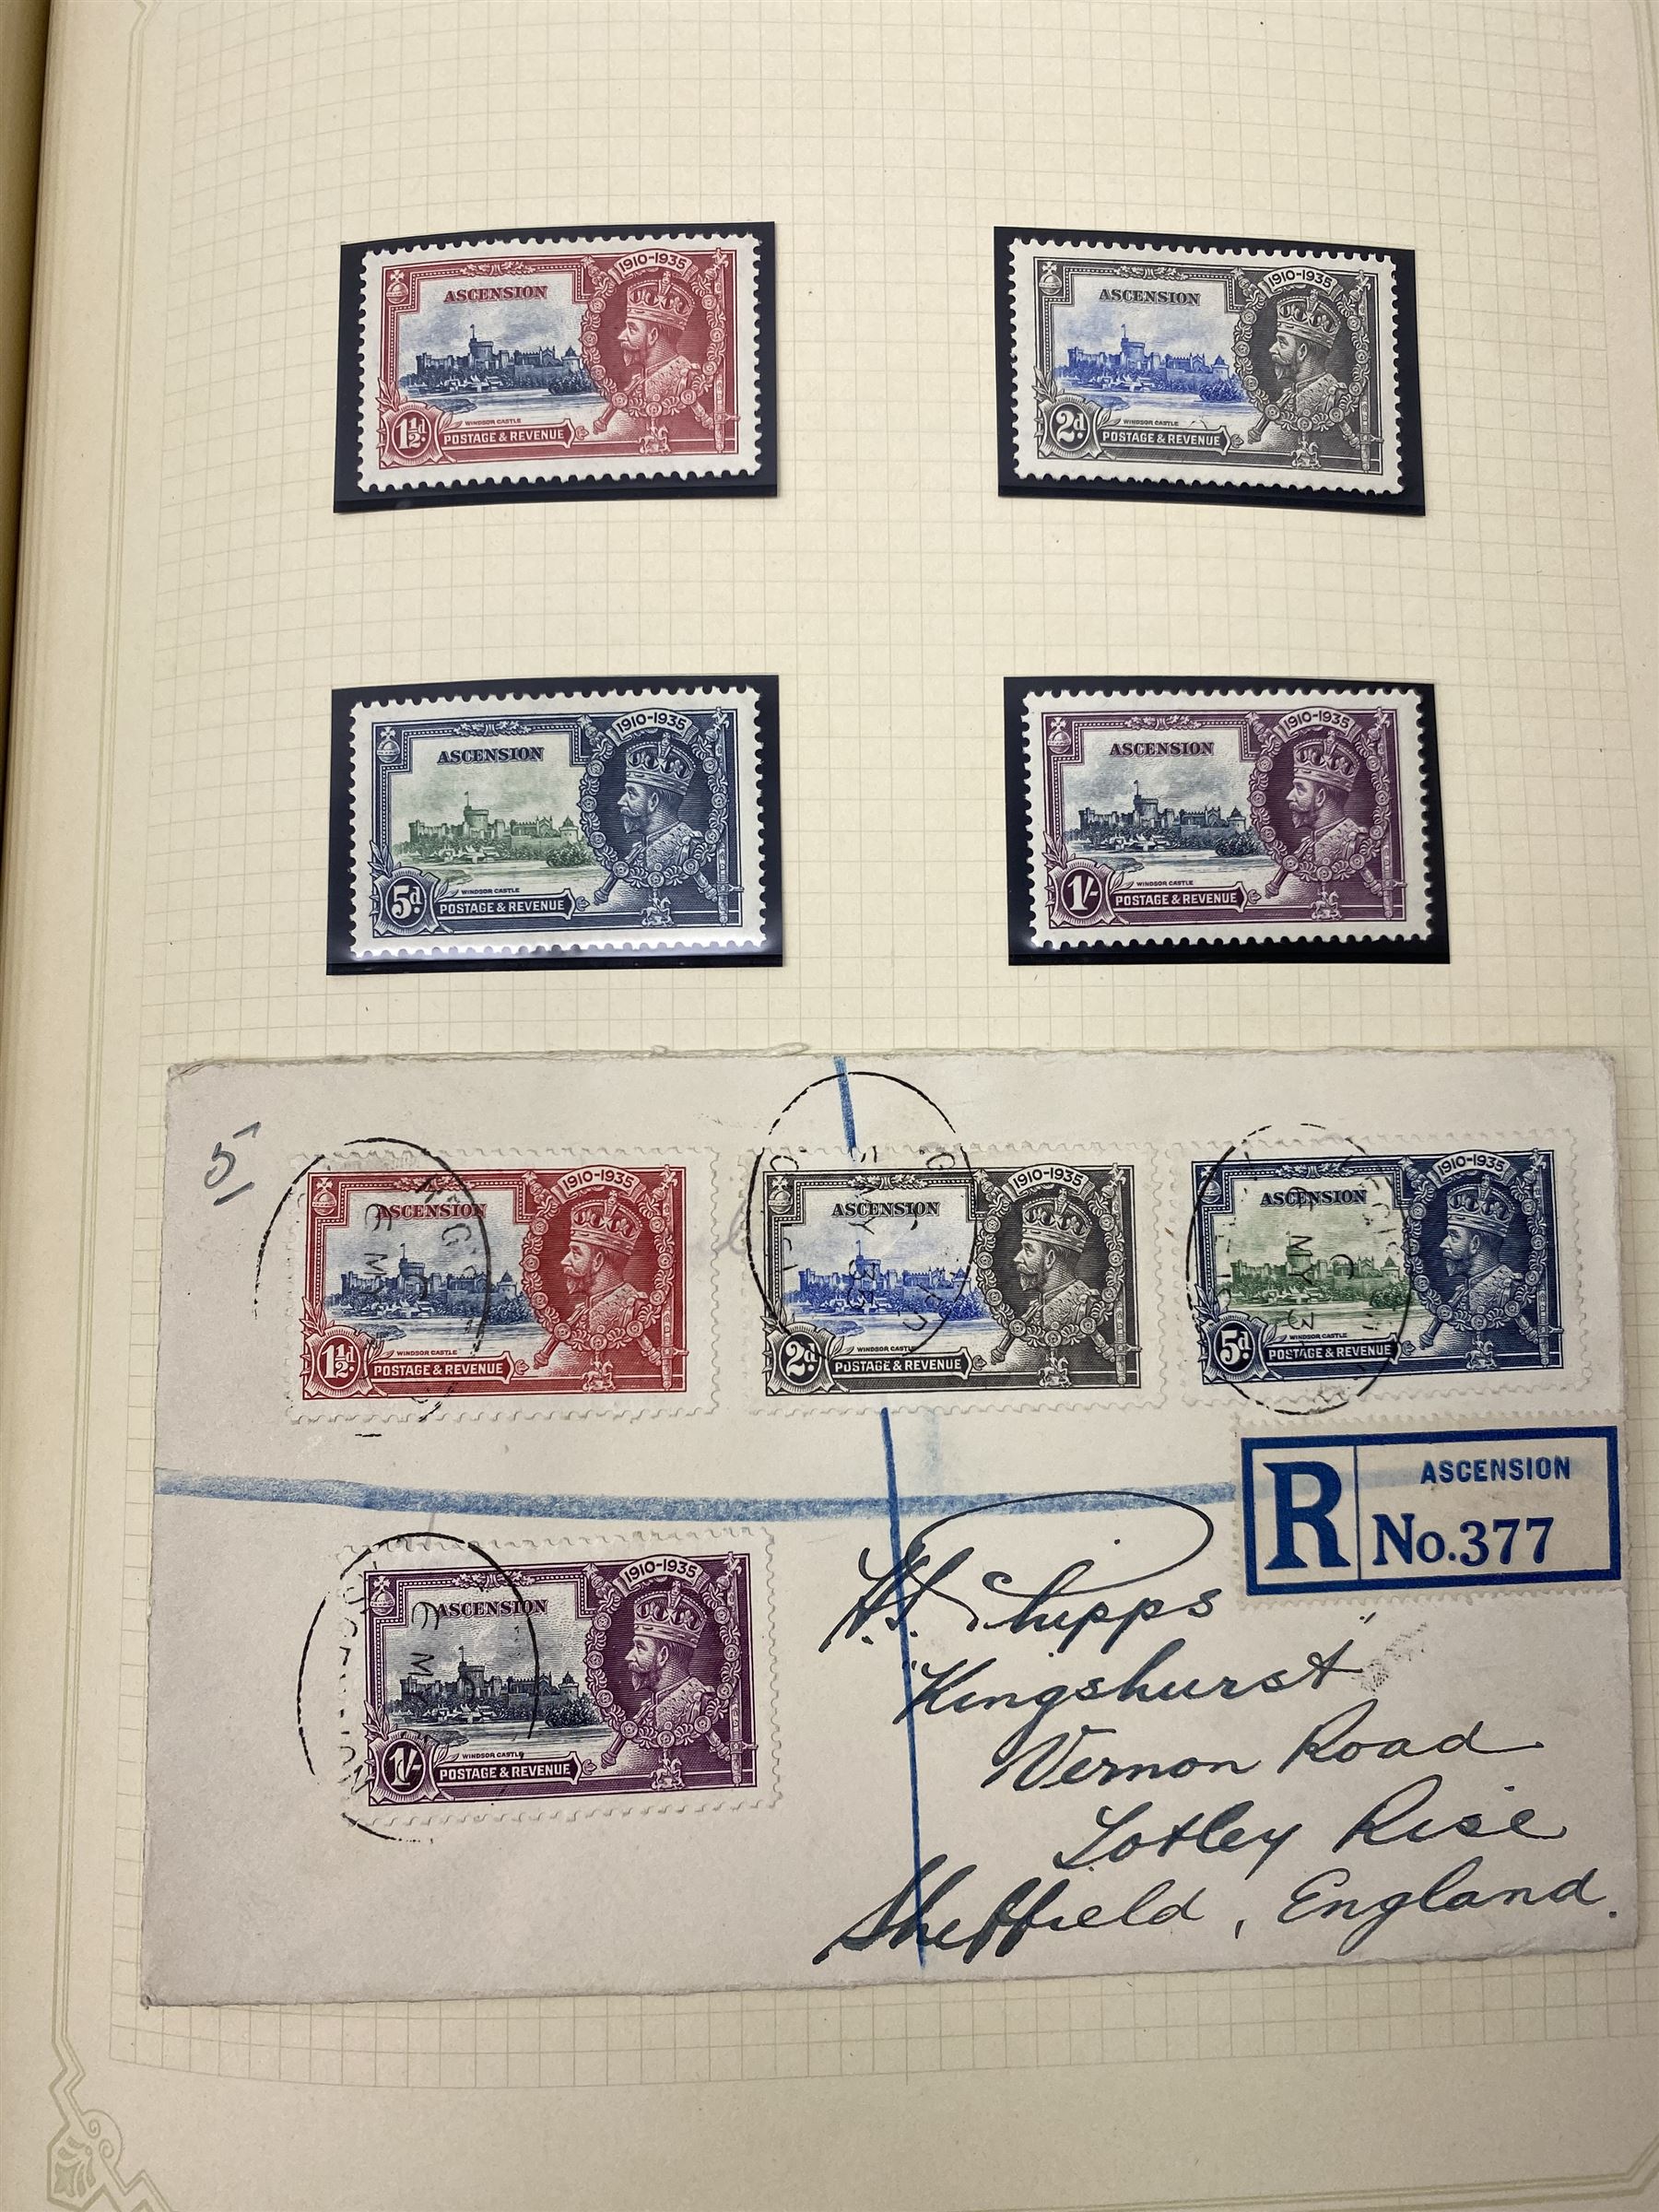 King George V 1935 Silver Jubilee stamps - Image 5 of 17